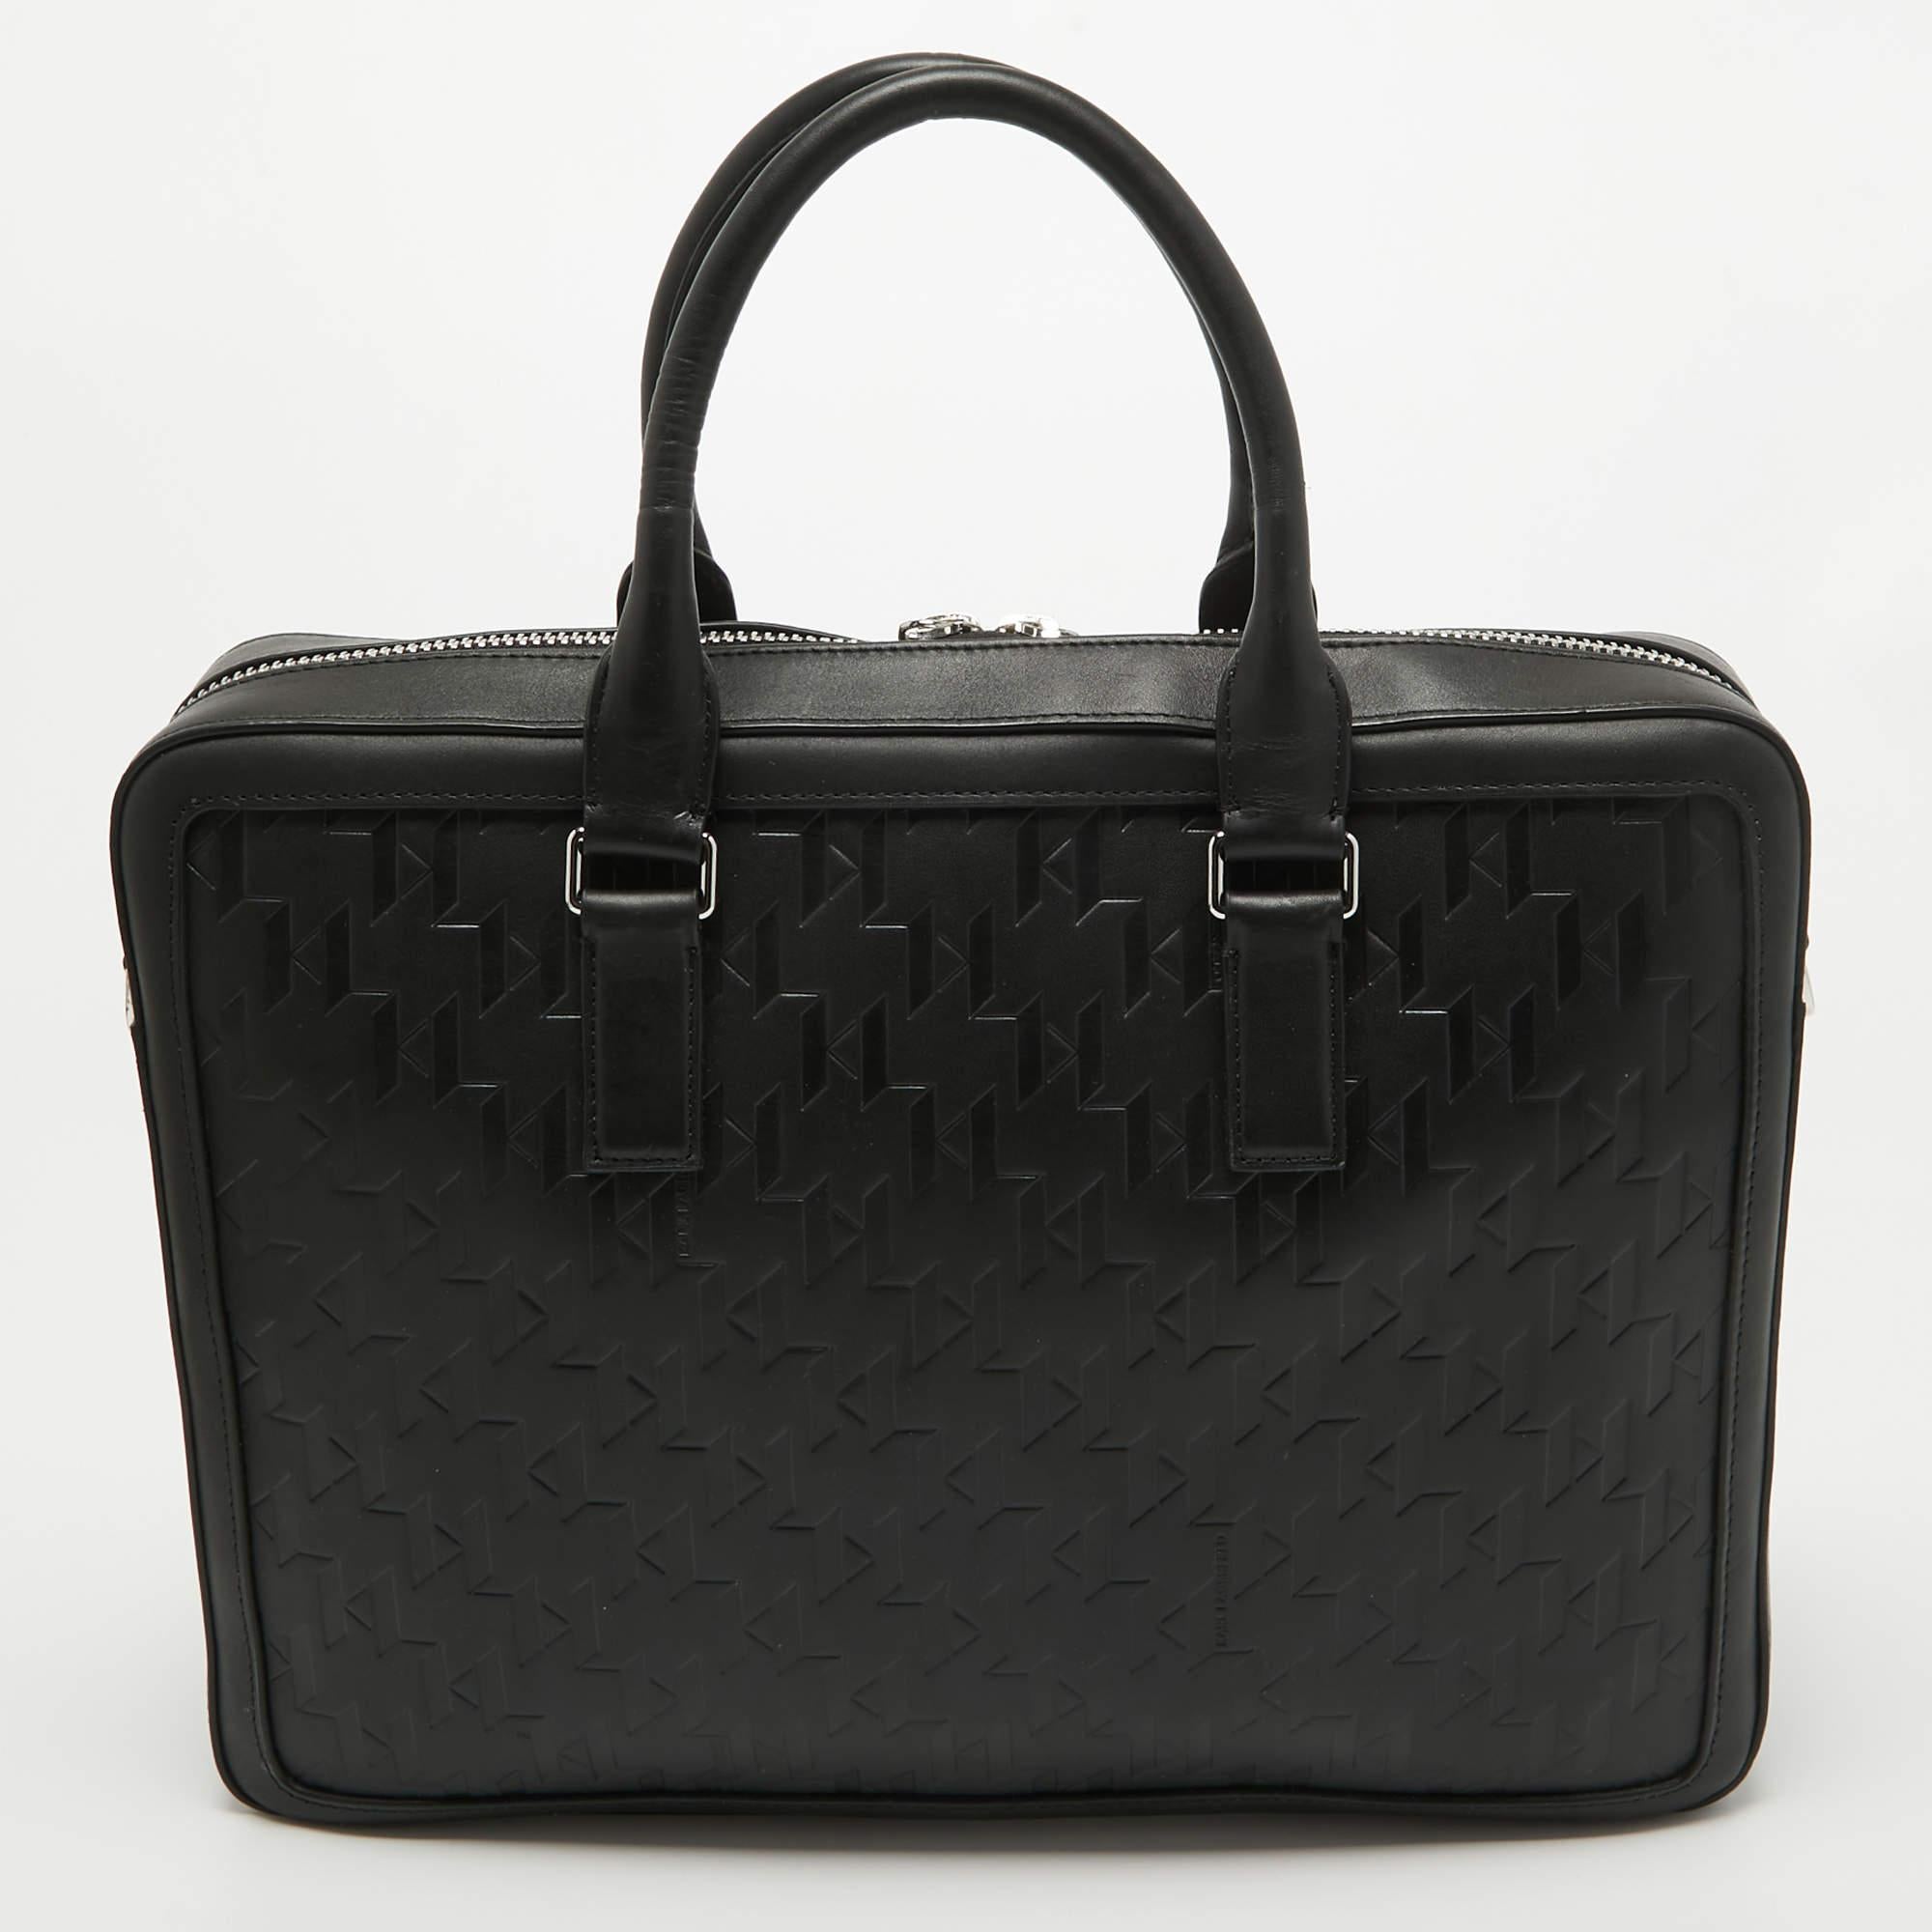 Perfect for housing your documents and other work essentials, this briefcase will make an elegant choice. Crafted with function in mind, this bag features a central capacious interior.

Includes: Original Dustbag, Detachable Strap, Info Card, Tag